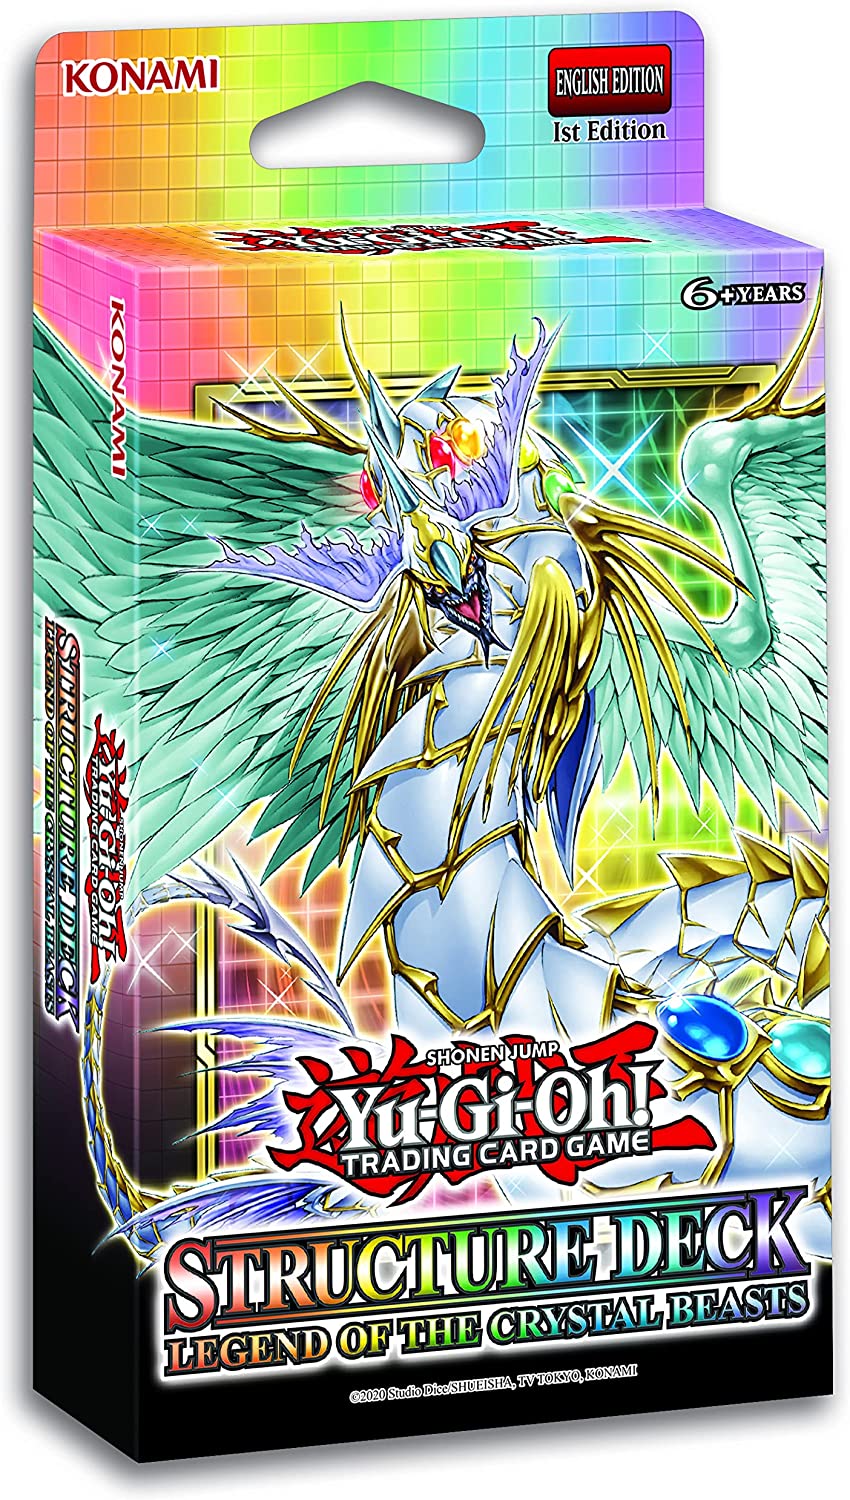 YU-GI-OH! Structure Deck, Legend Of The Crystal Beasts (SDCB) (Pack of 8)